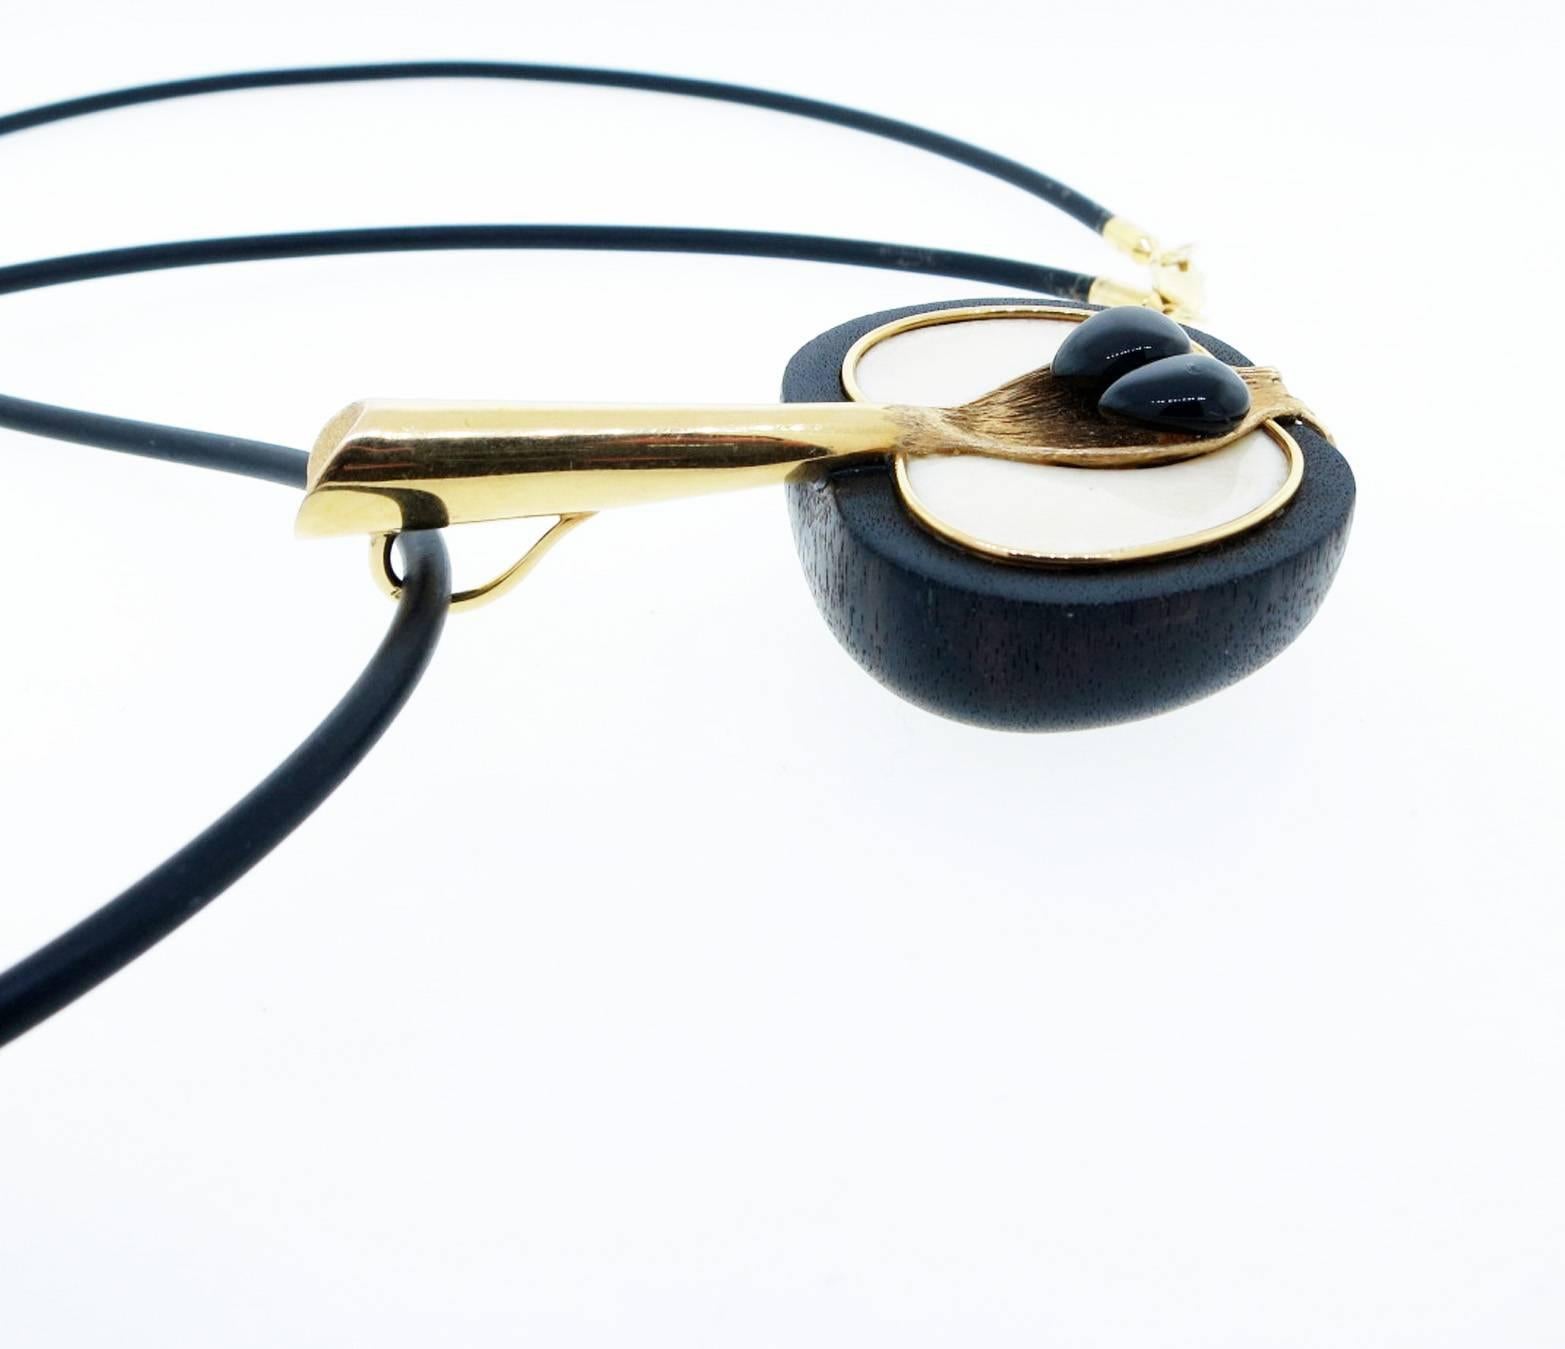 18kt. yellow gold dimensional apple pendant made of fruit wood with a bone inlay with onyx seed accents . The pendant measures 3 3/4 inches in length . The rubber cord measures 30 inches in length